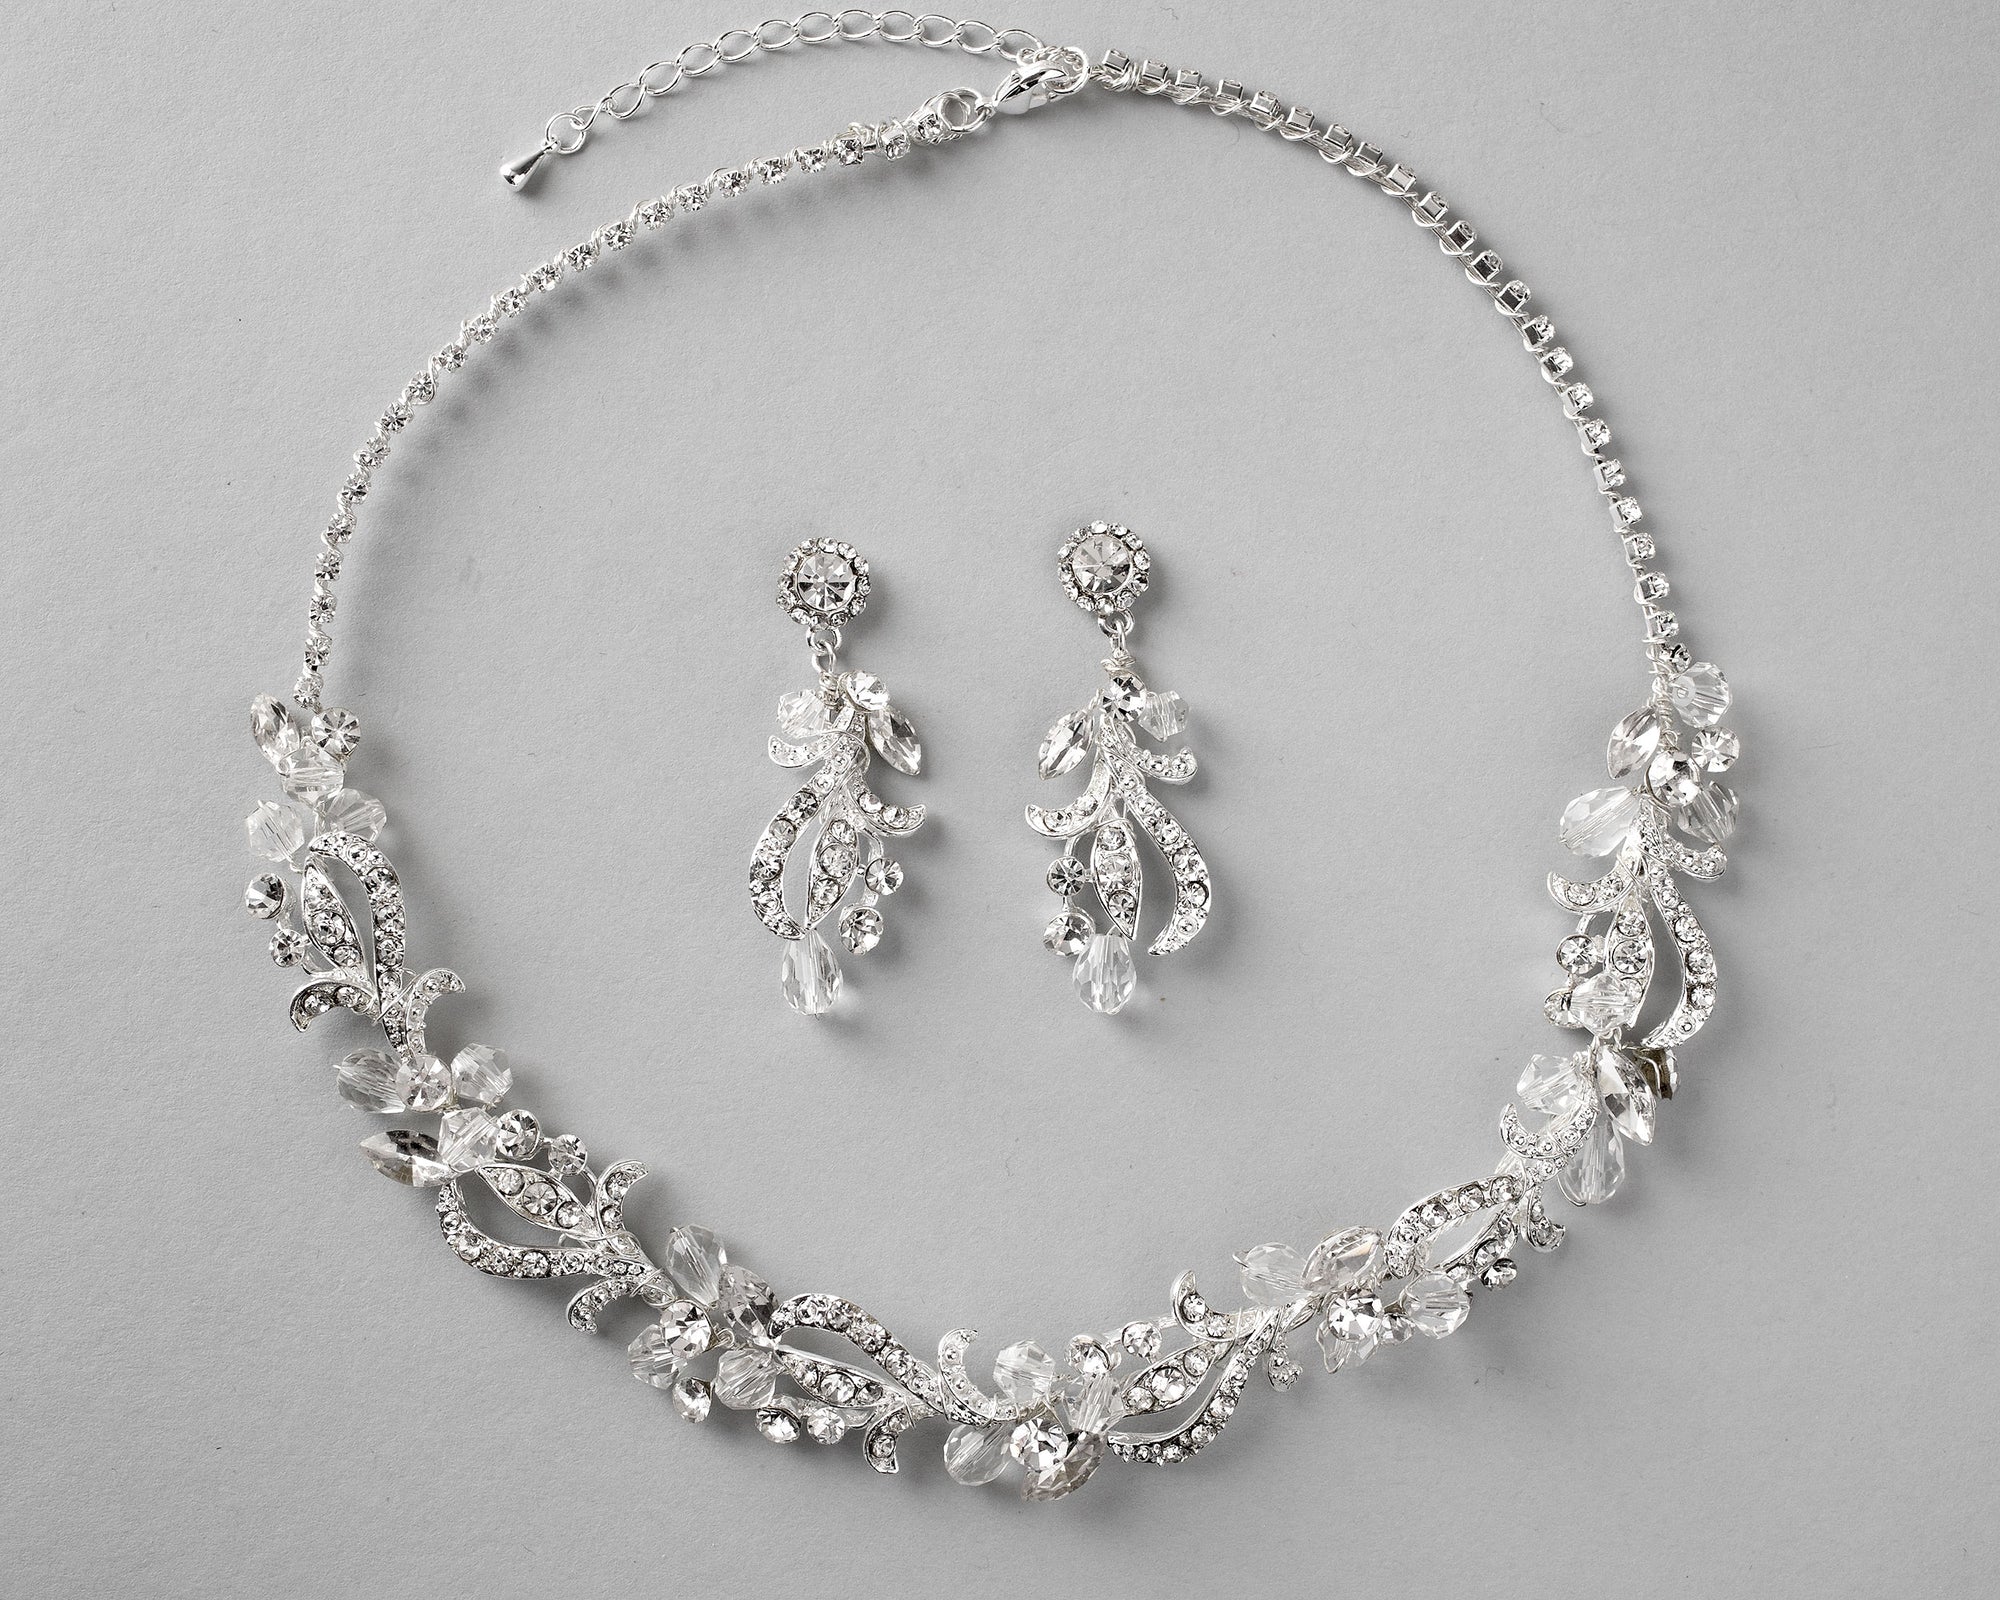 Bridal Necklace Set of Crystal Beads and Waves